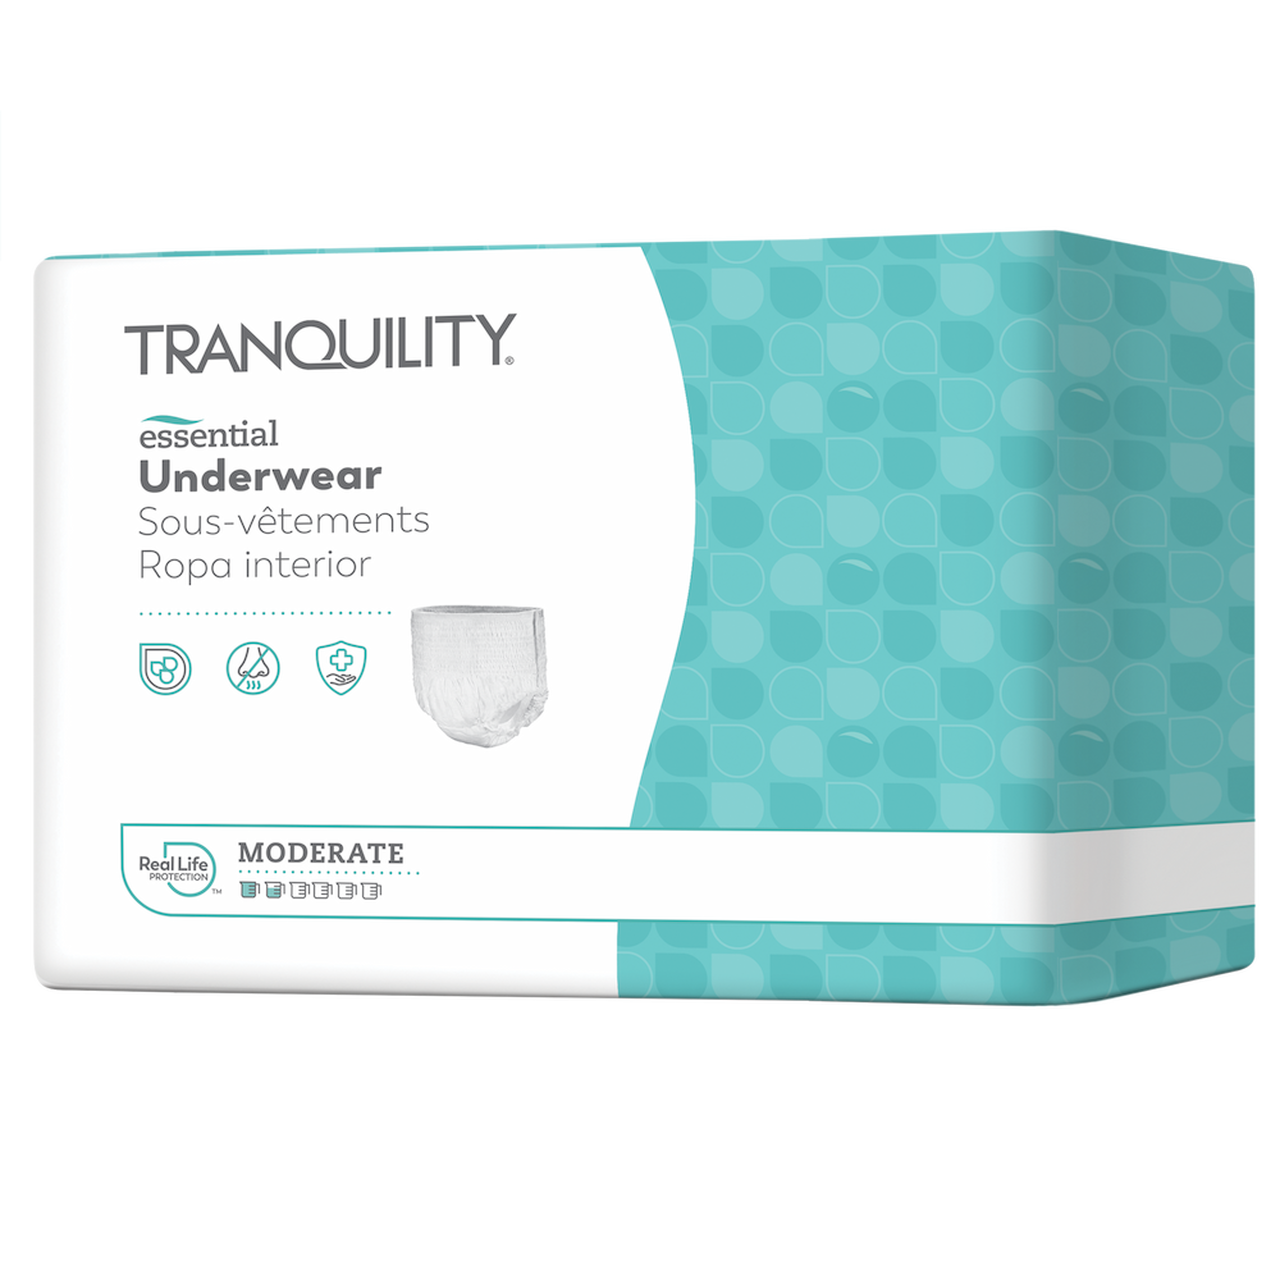 Disposable Incontinence Underwear for Men, Women Teens & Kids from